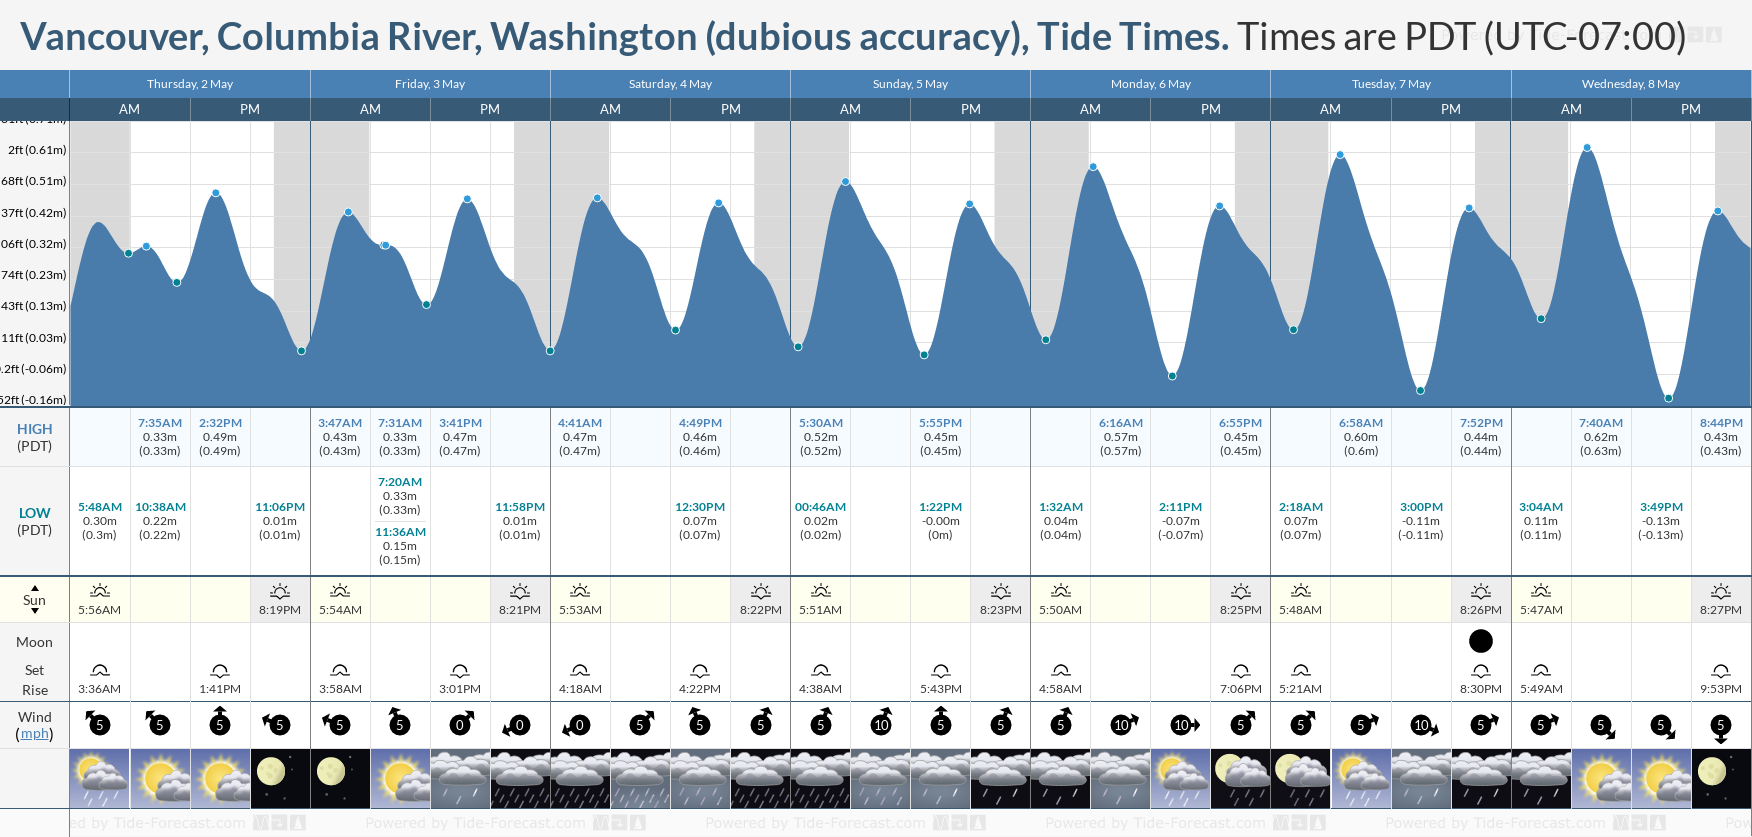 Vancouver, Columbia River, Washington (dubious accuracy) Tide Chart including high and low tide tide times for the next 7 days